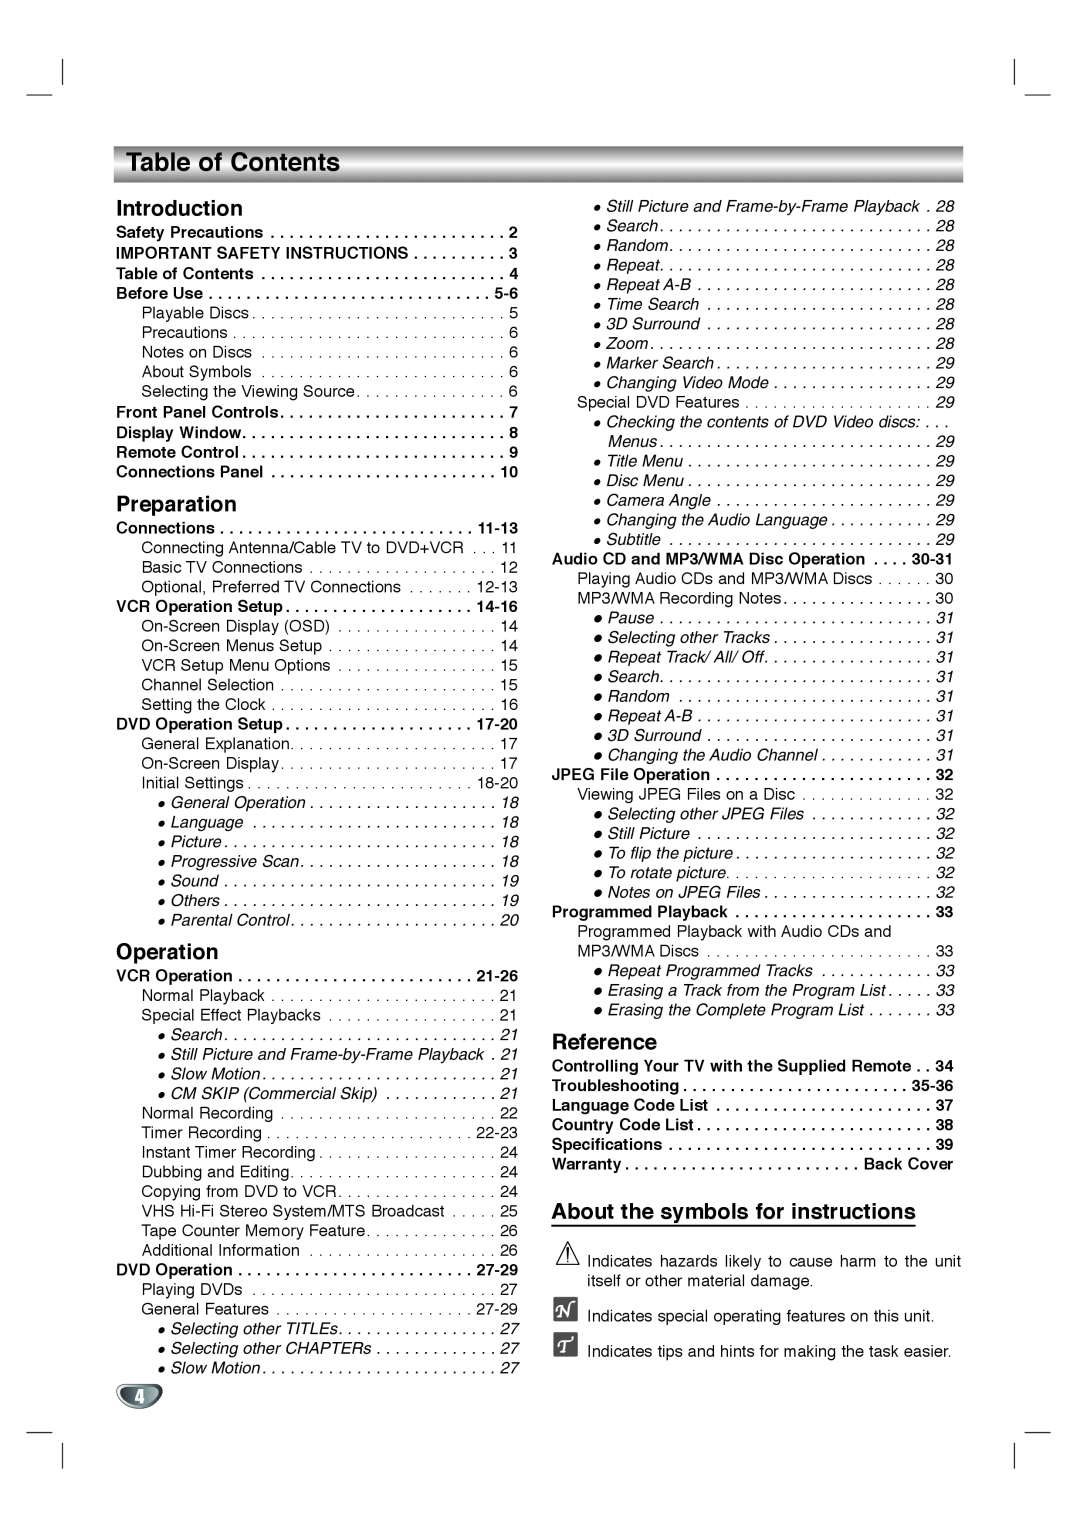 Zenith XBV 442 Table of Contents, Introduction, Preparation, Operation, Reference, About the symbols for instructions 